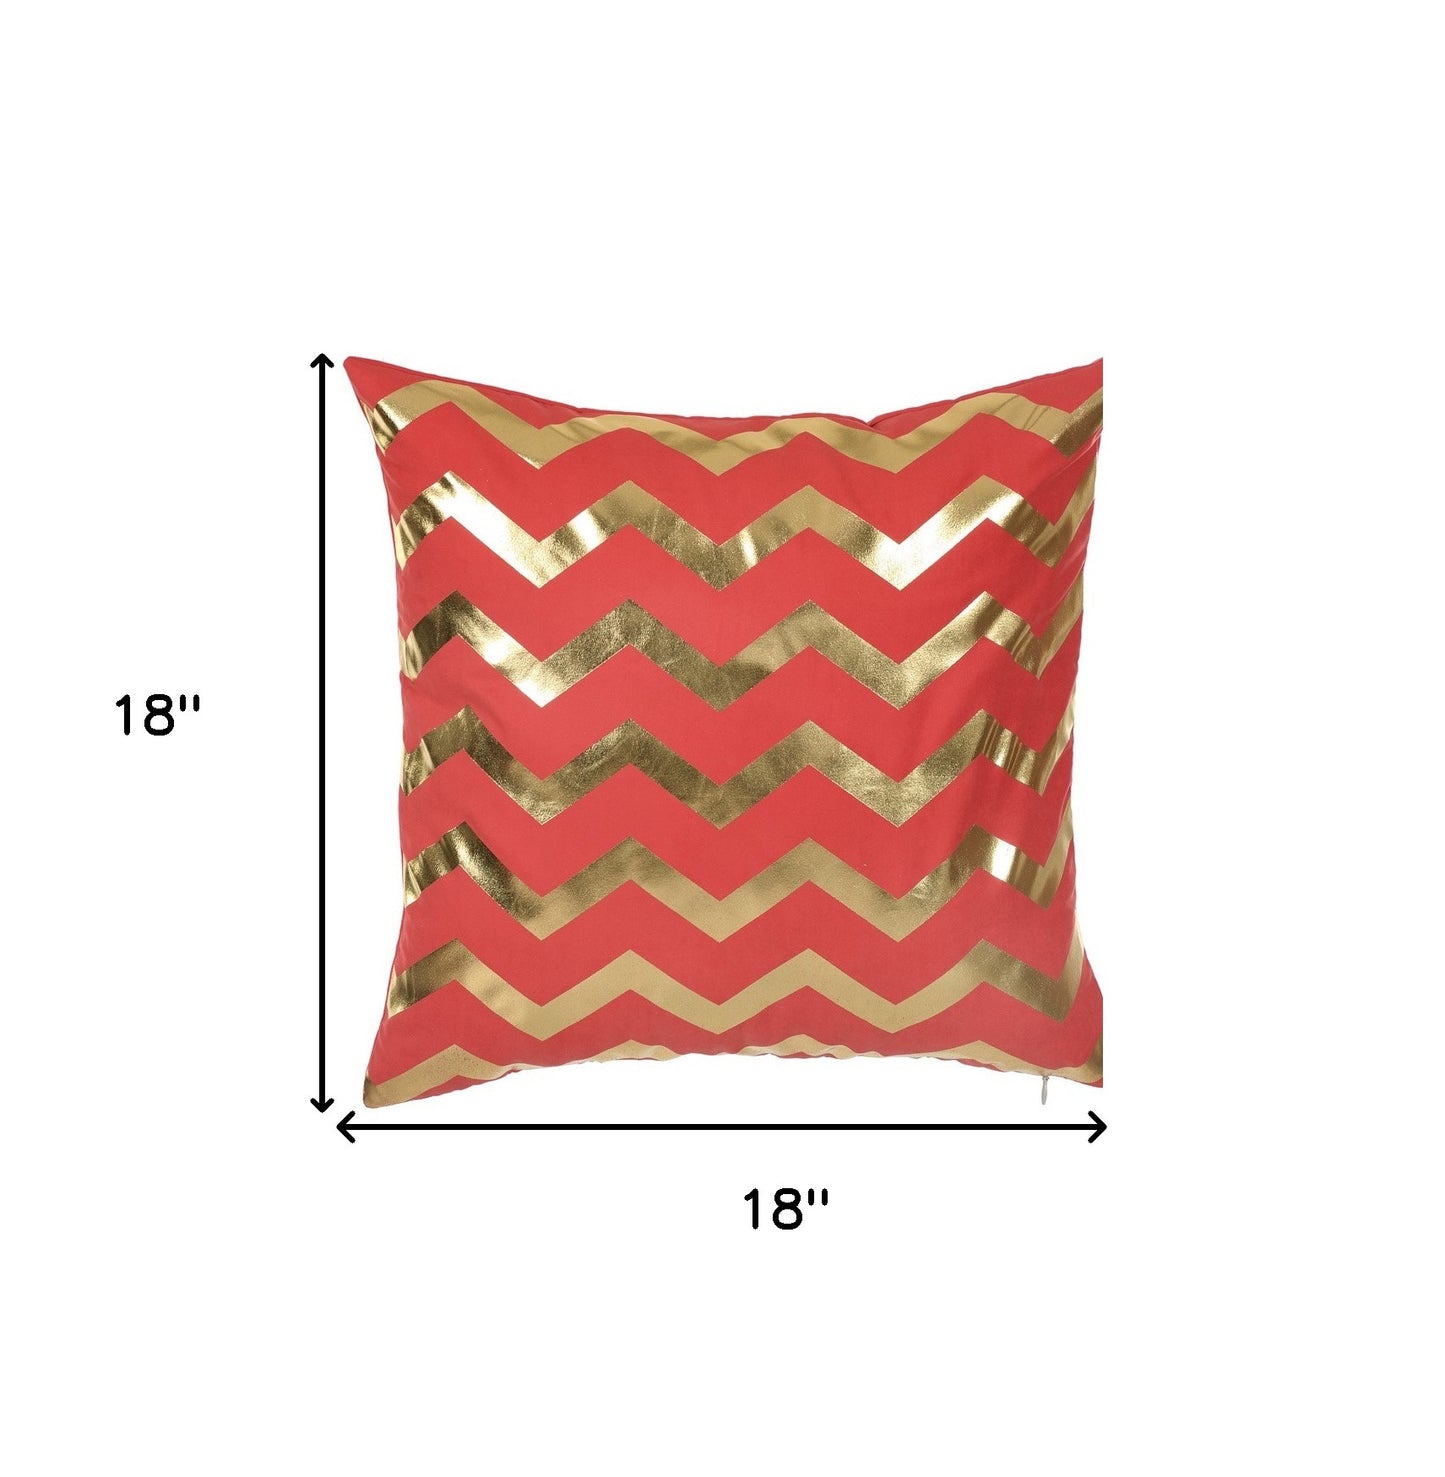 Gold And Red Chevron Decorative Throw Pillow Cover